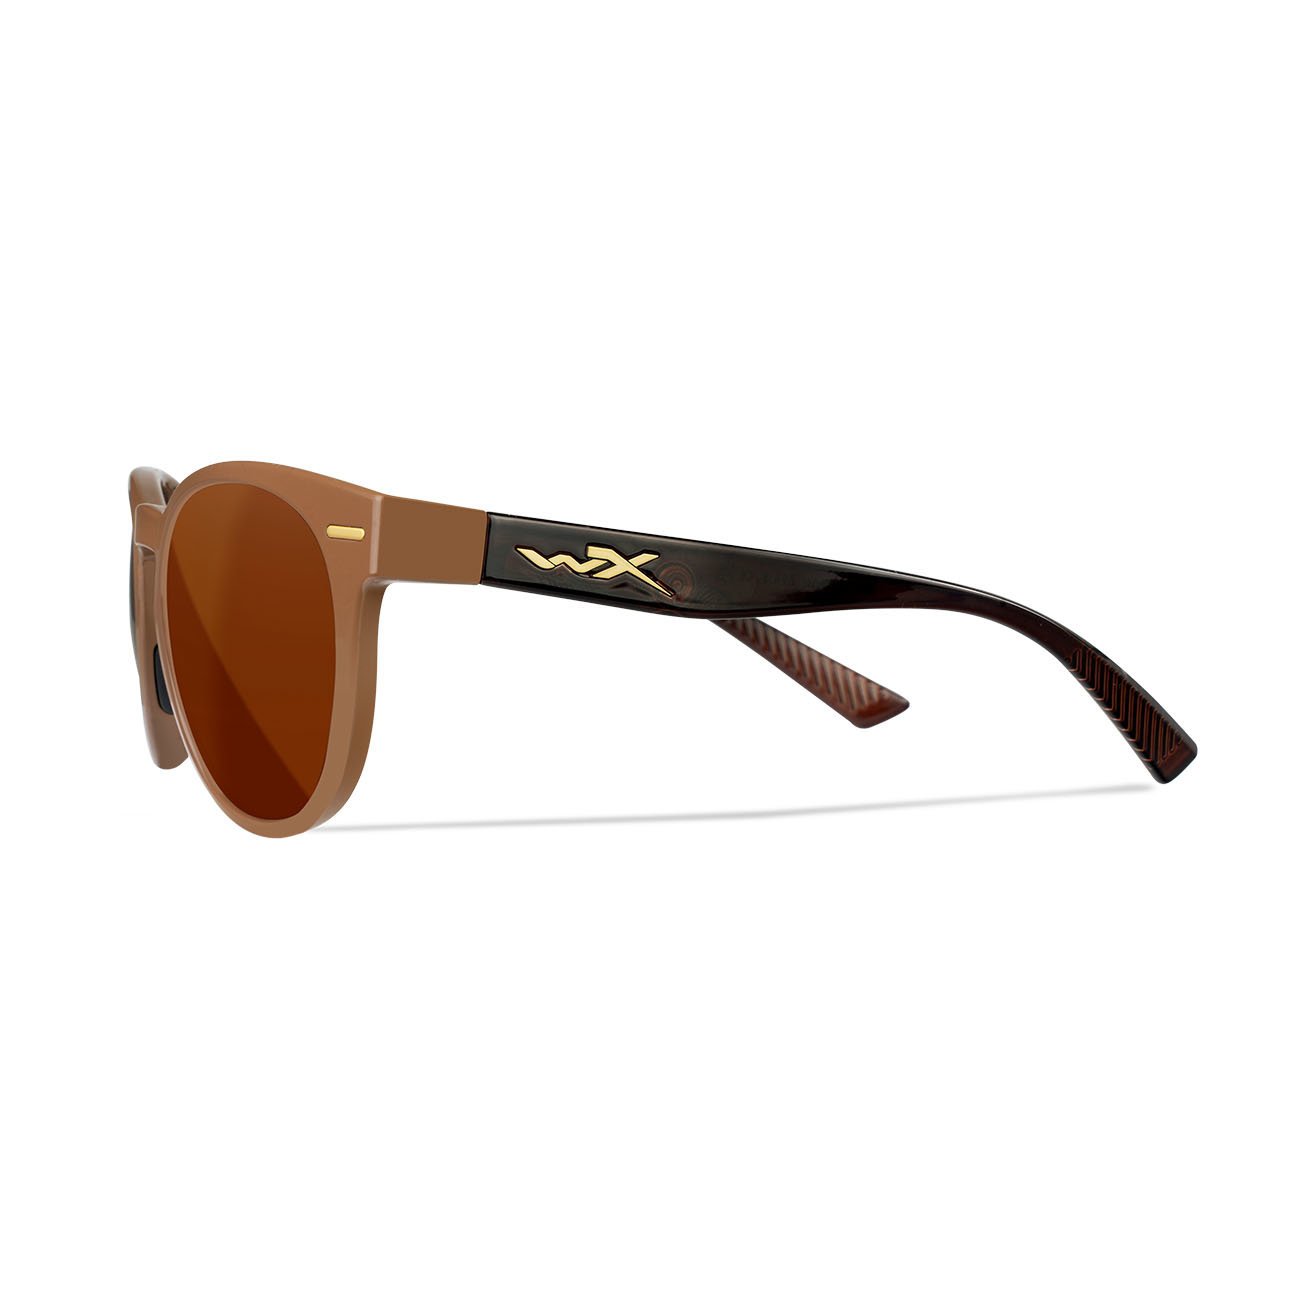 Wiley X – COVERT Captivate Polarized Copper Gloss Coffee/Crystal Brown Frame German / Italy / Netherlands / Czech / France / Poland / Portugal / Hungary / Lithuania / Slovakia